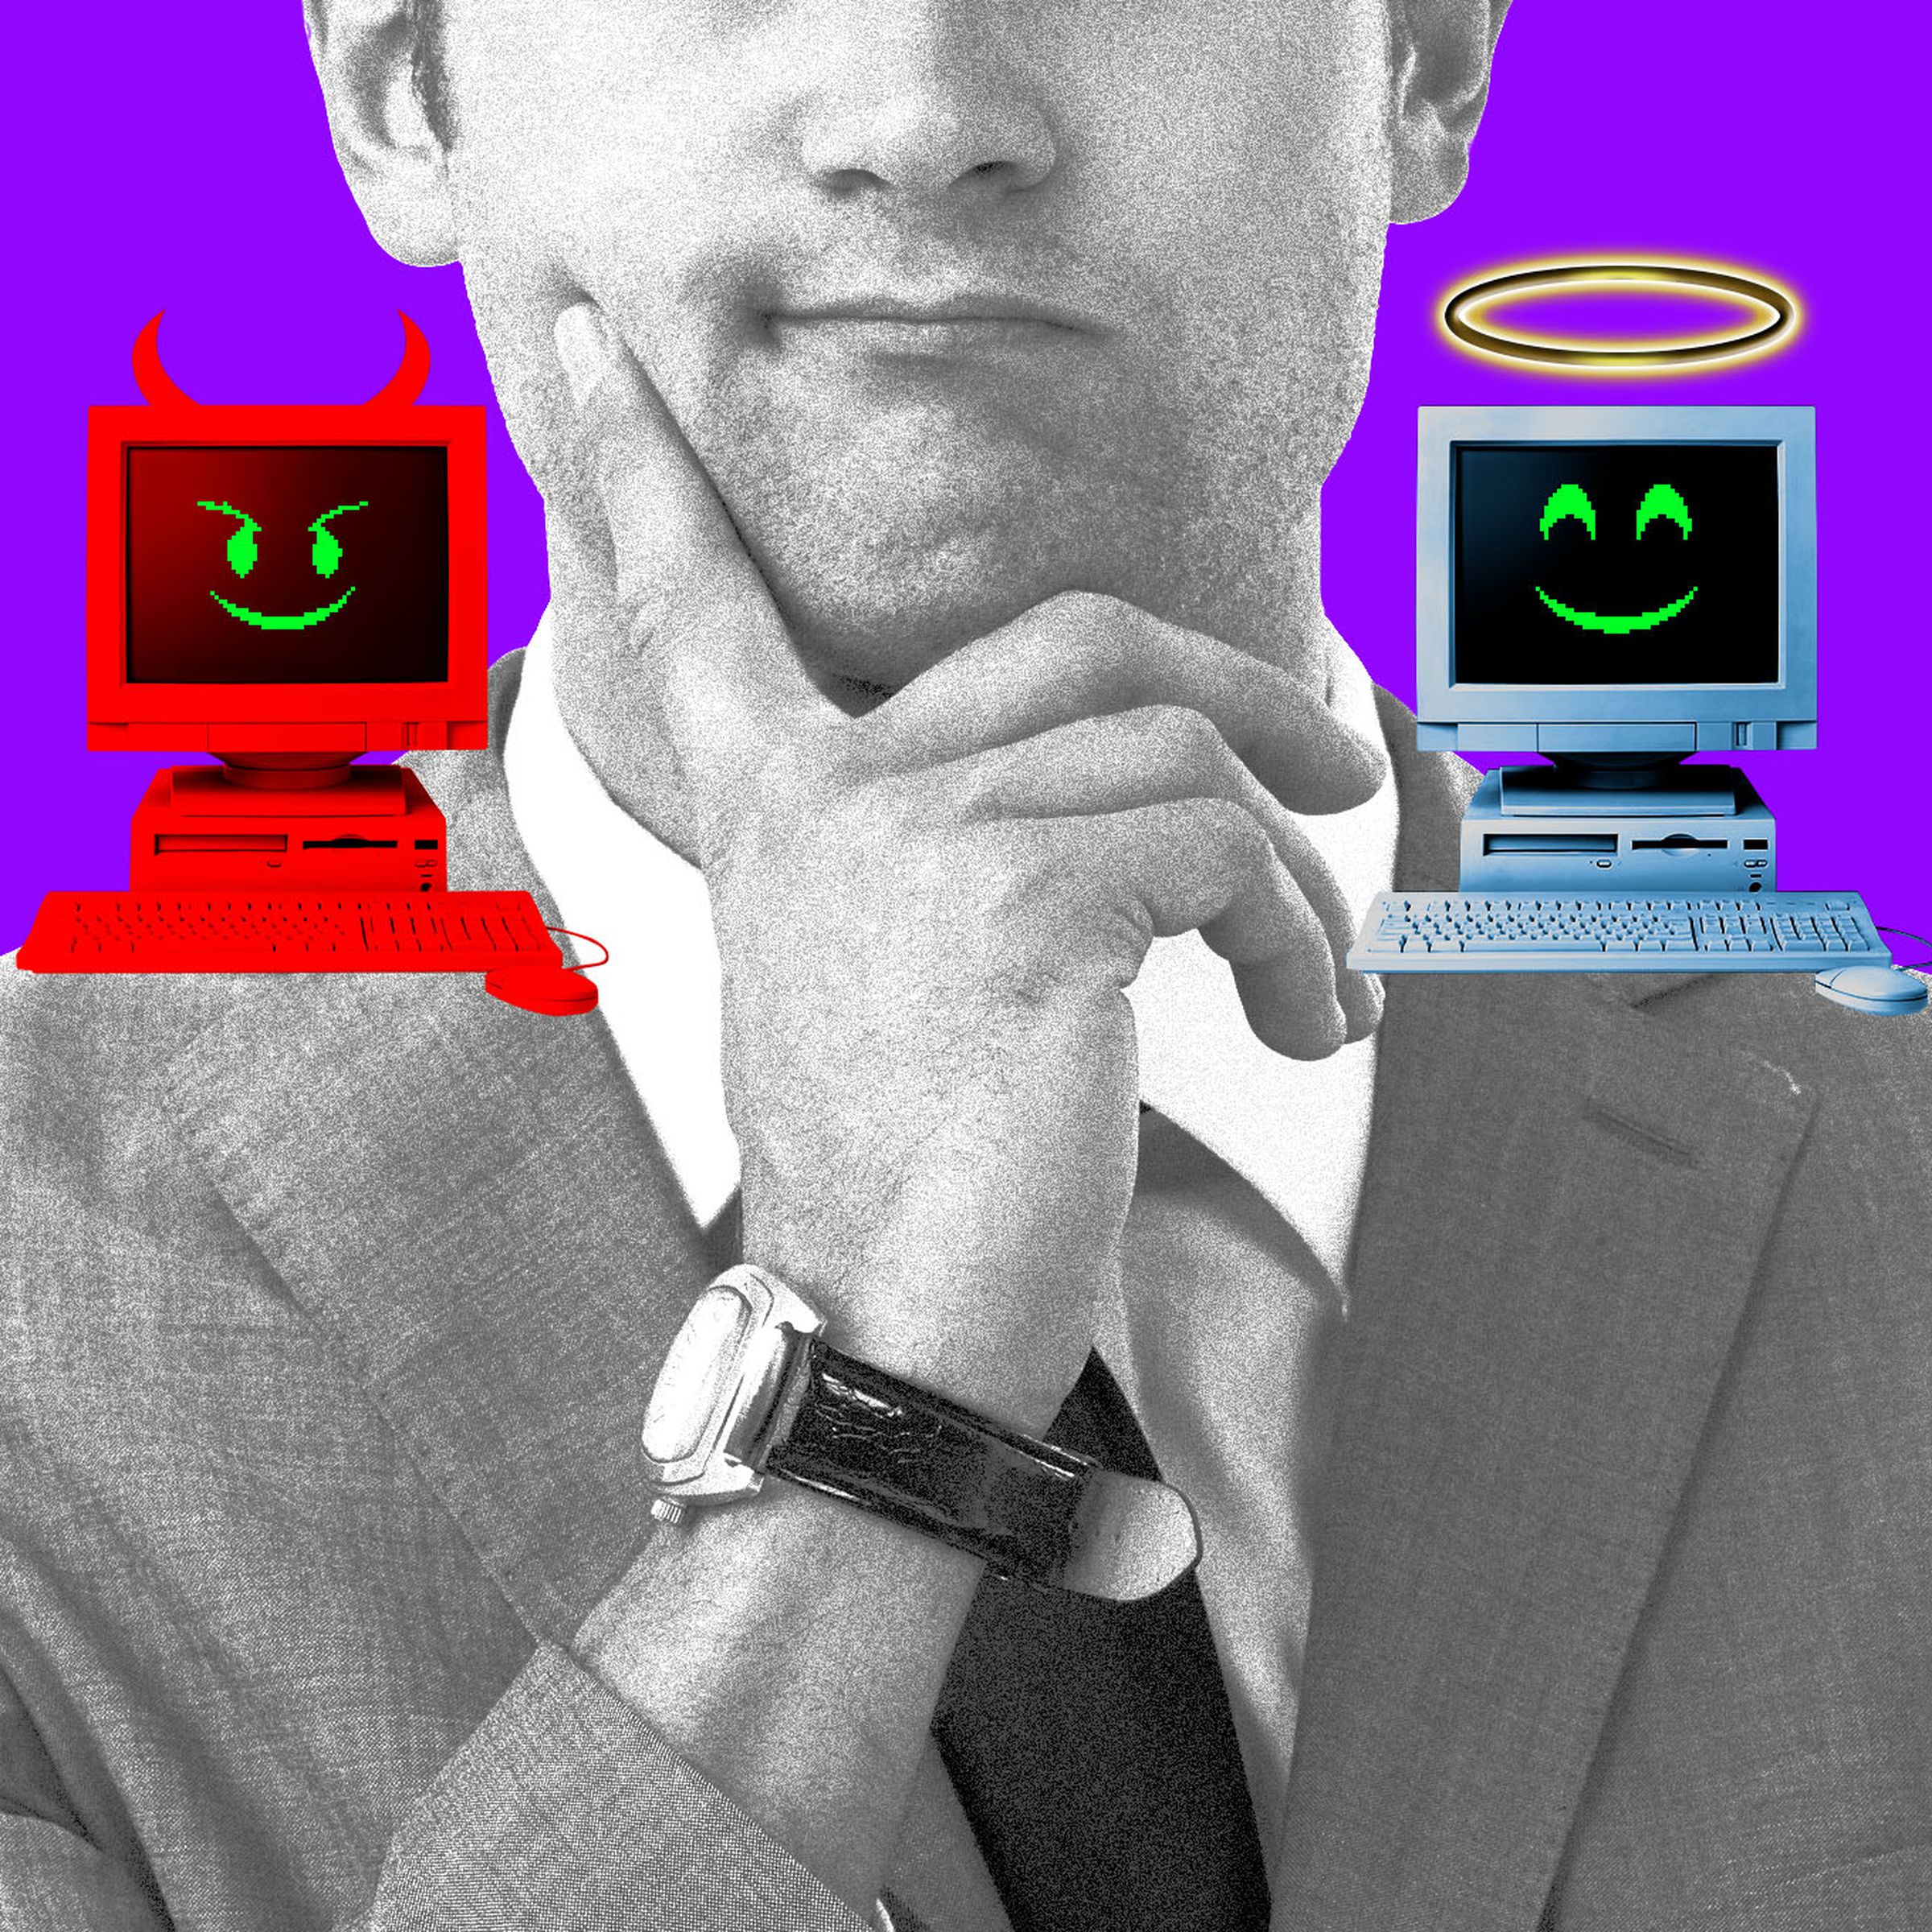 Collage of a person in a suit choosing between a devil computer and an angel computer.